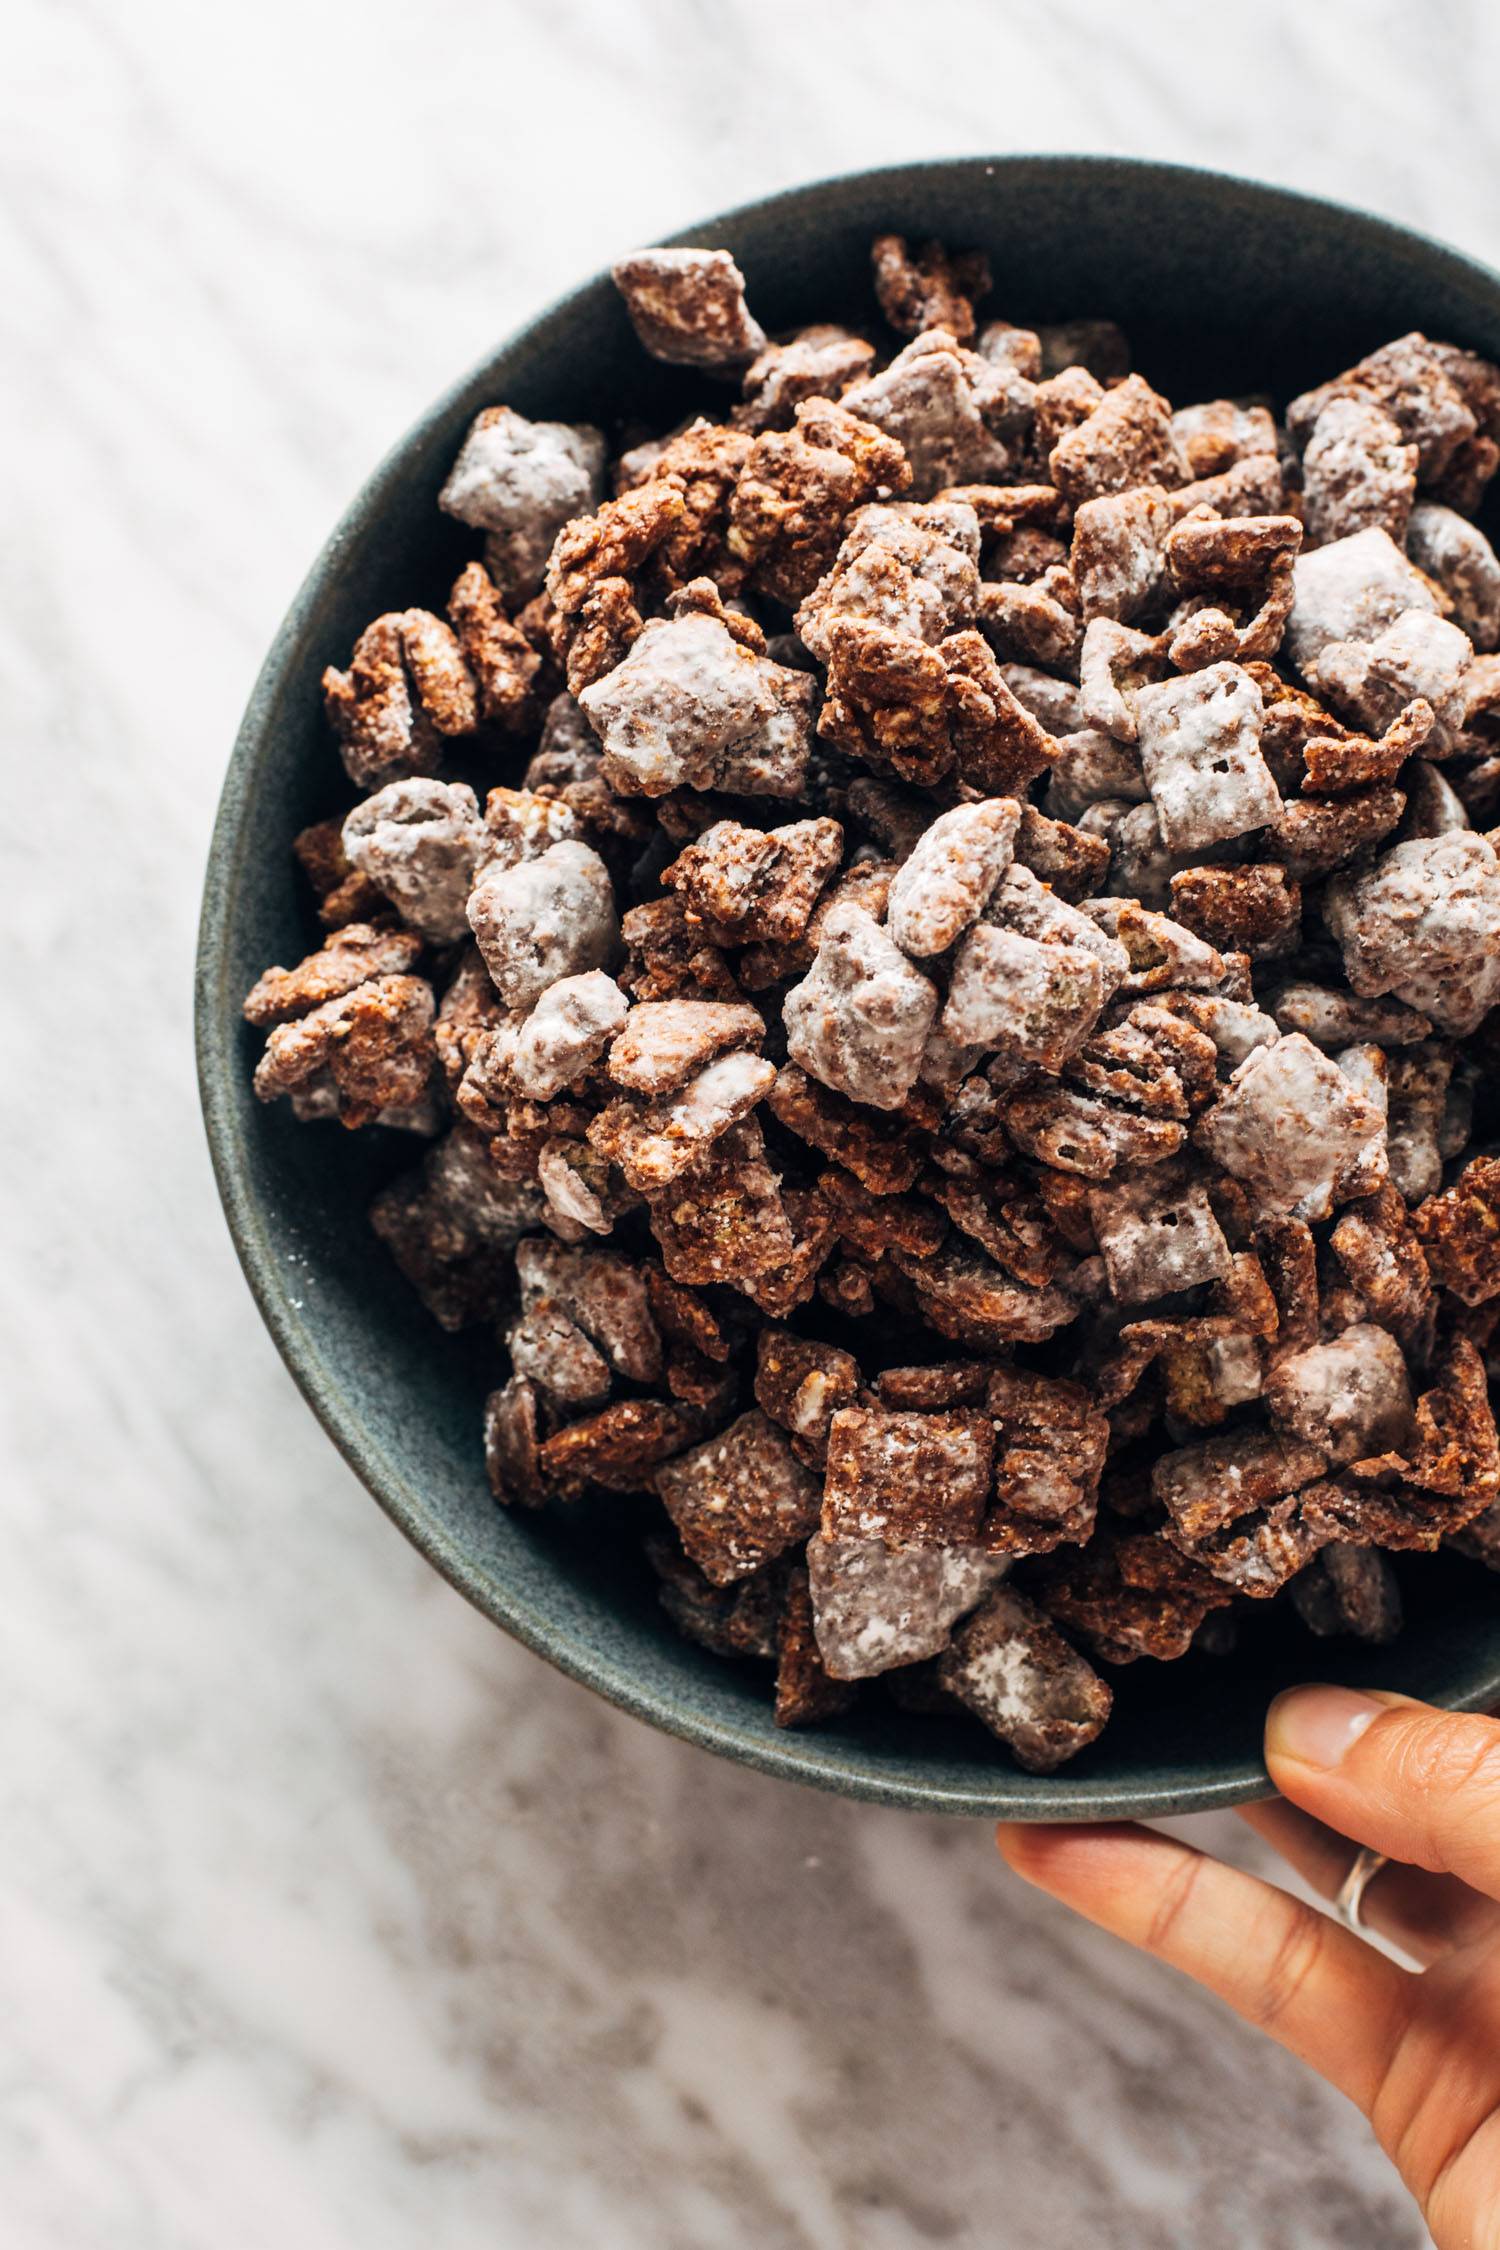 Puppy chow piled in a bowl.